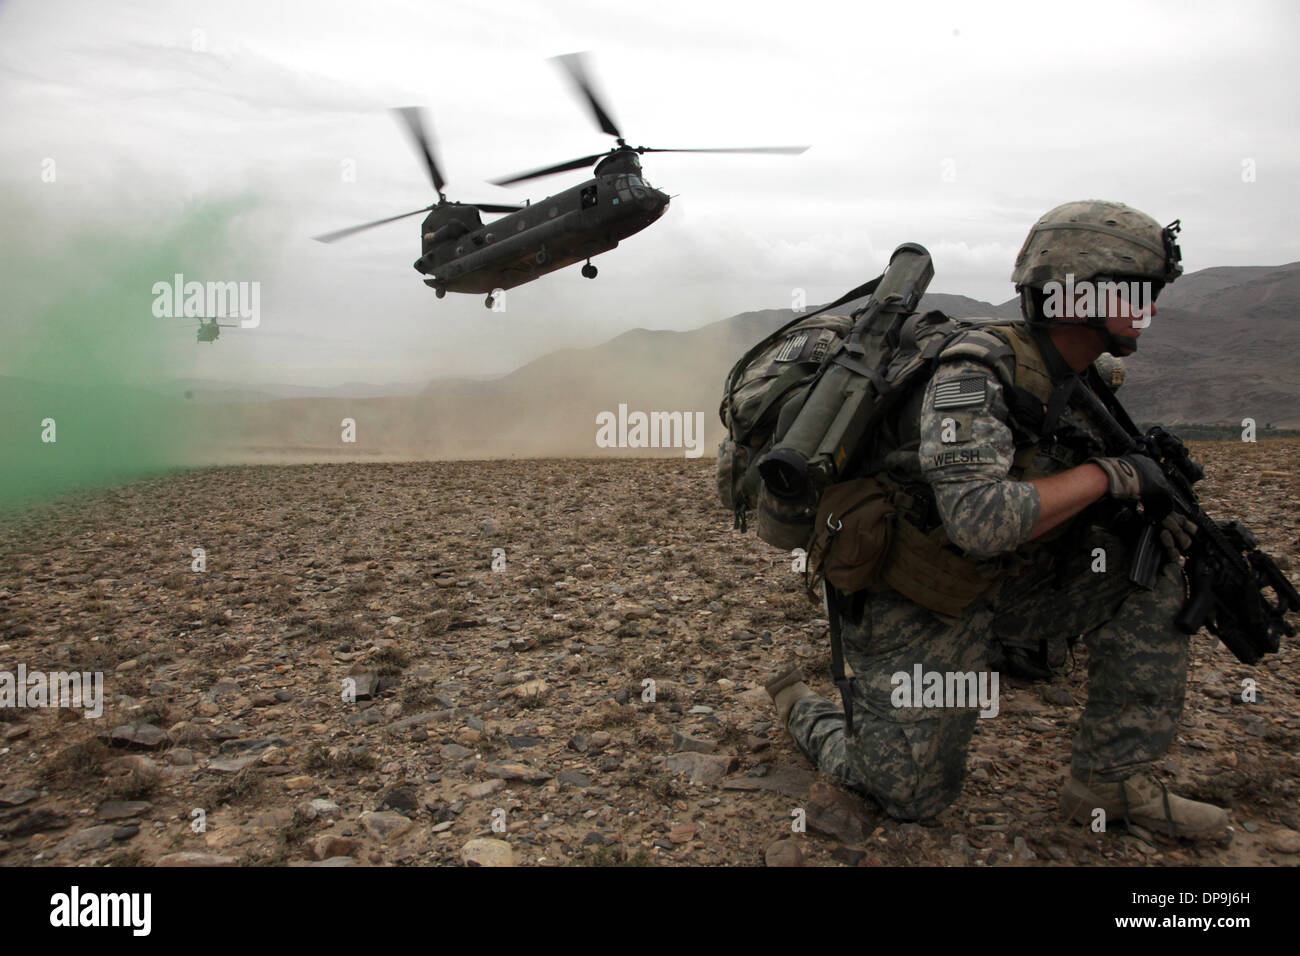 U.S. Army soldier provides security before boarding a CH-47 Chinook helicopter in Afghanistan Stock Photo